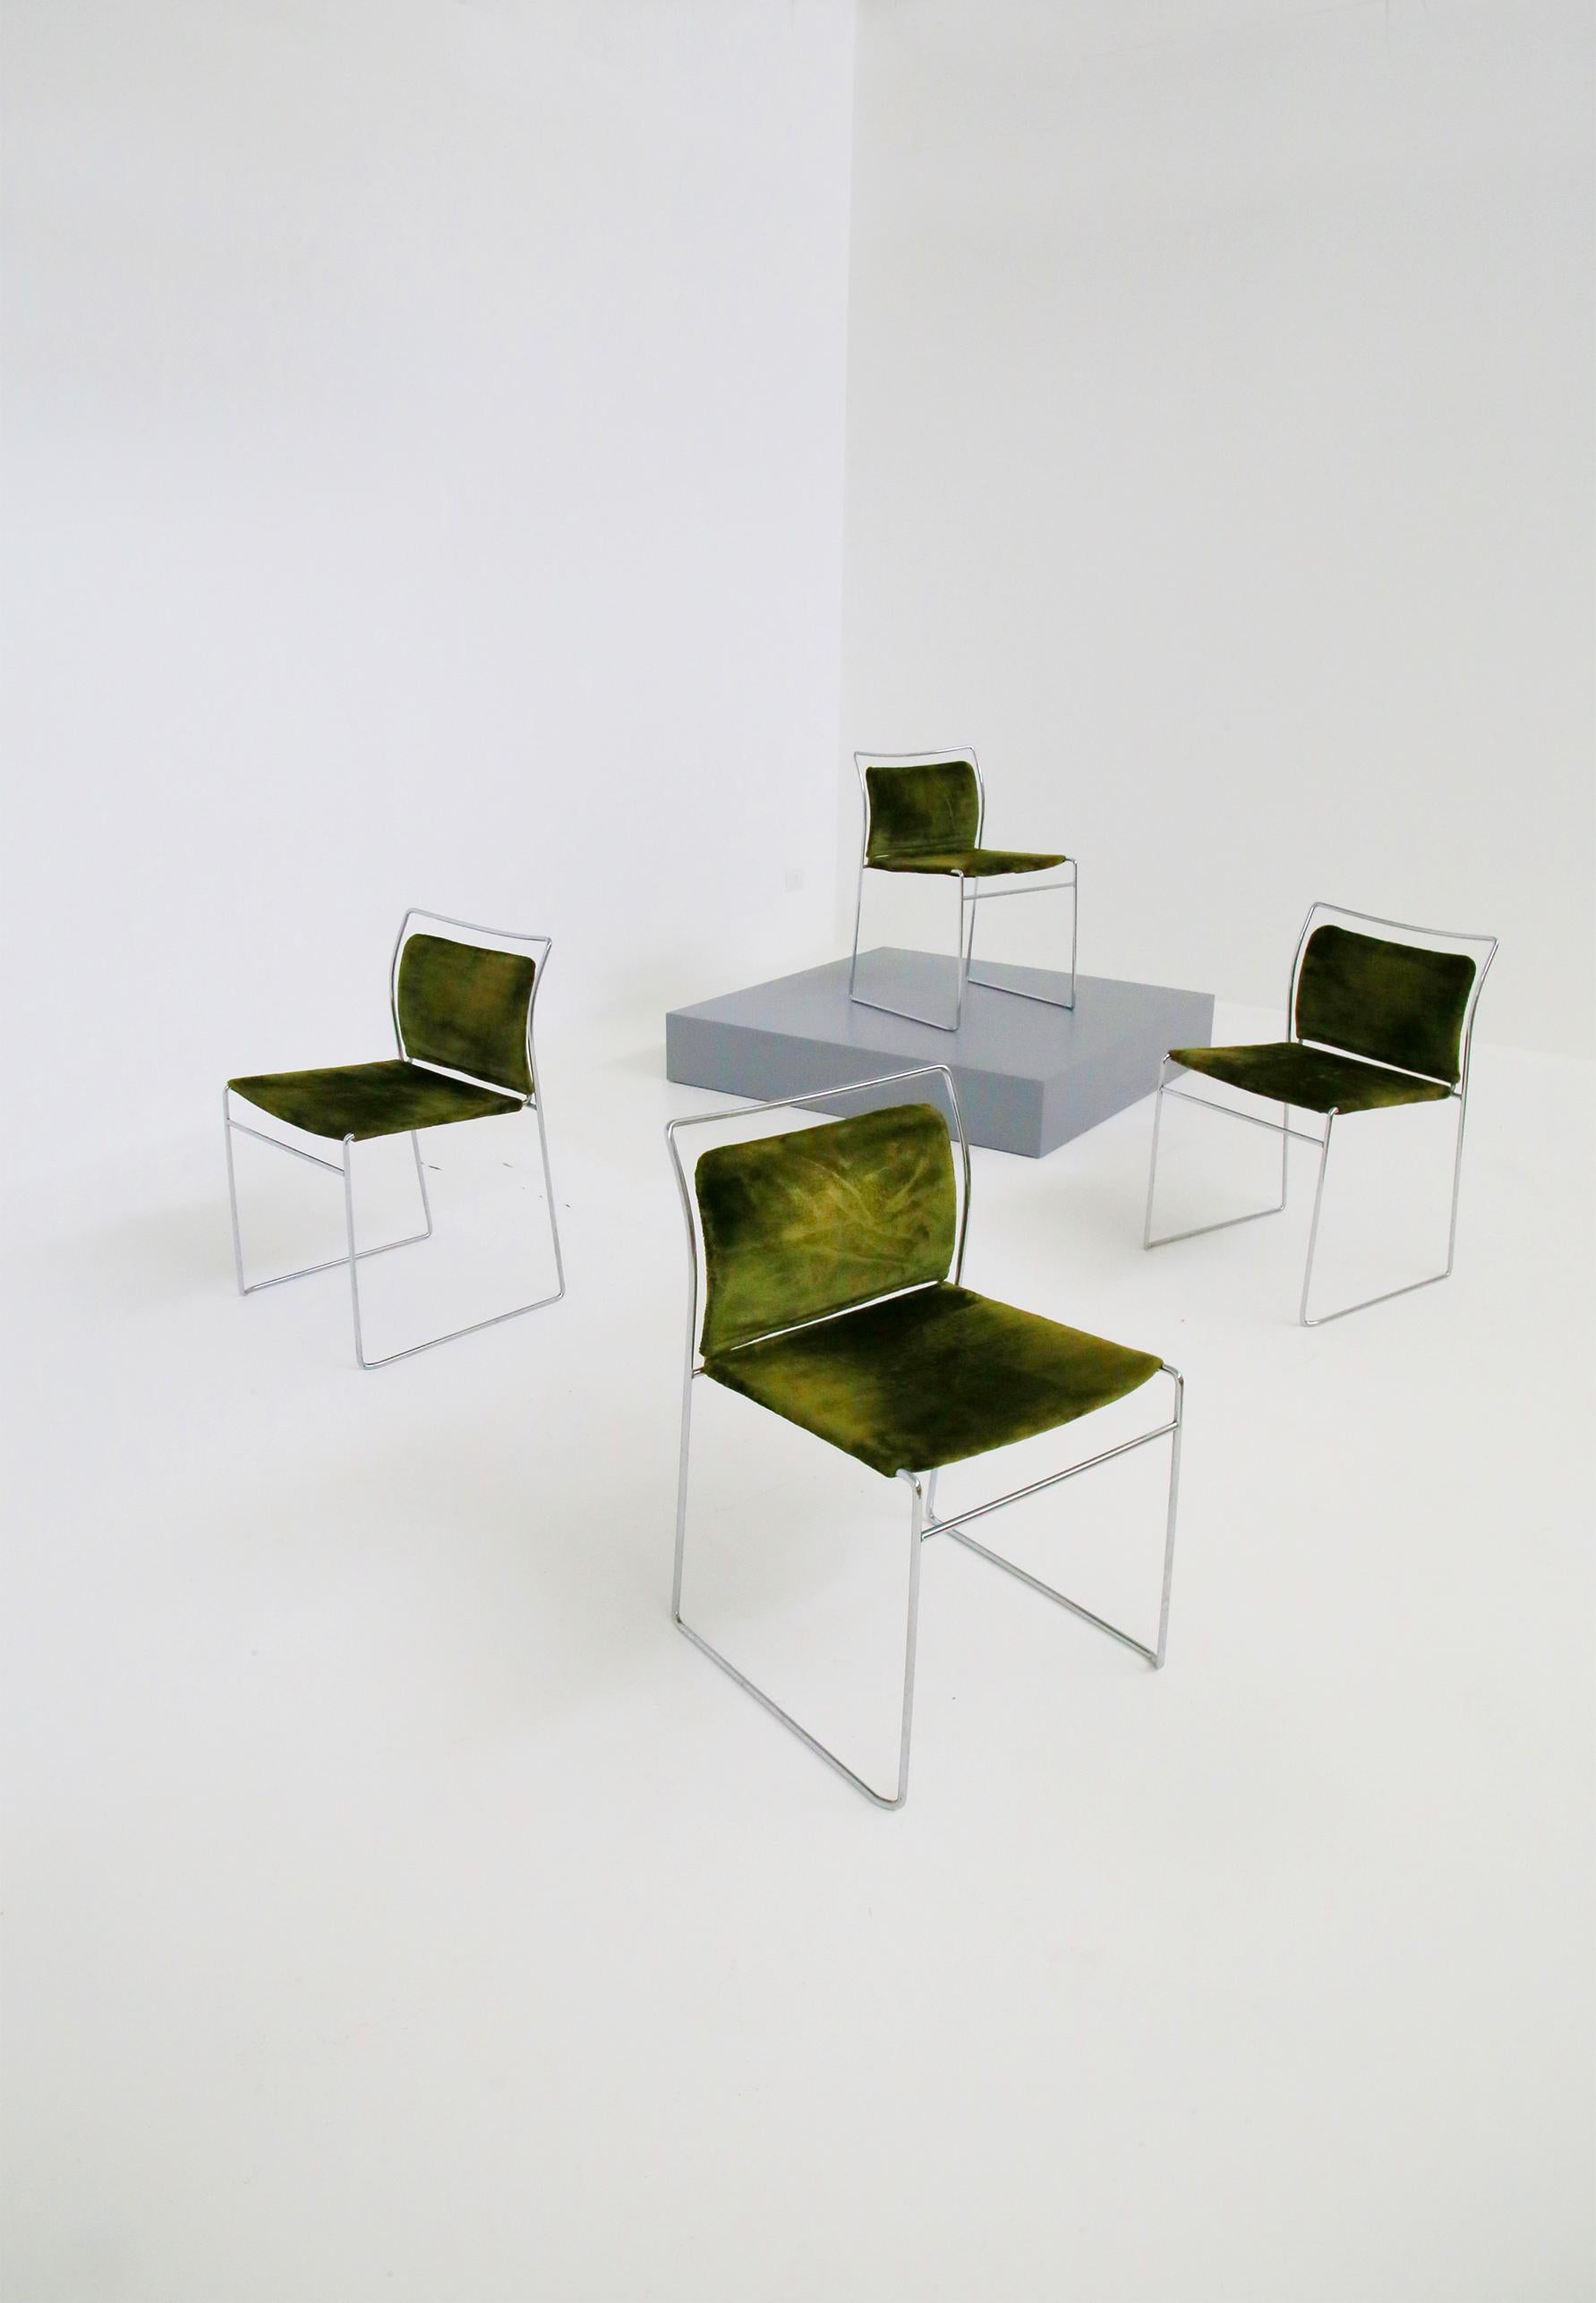 Set of four chairs designed by Kazuhide Takahama for the Gavina factory. The chairs are the 1969 Tulu Model. The chairs are made of tubular steel. Its realization gives the chairs an almost imperceptible fine line. Its volume is given by the green